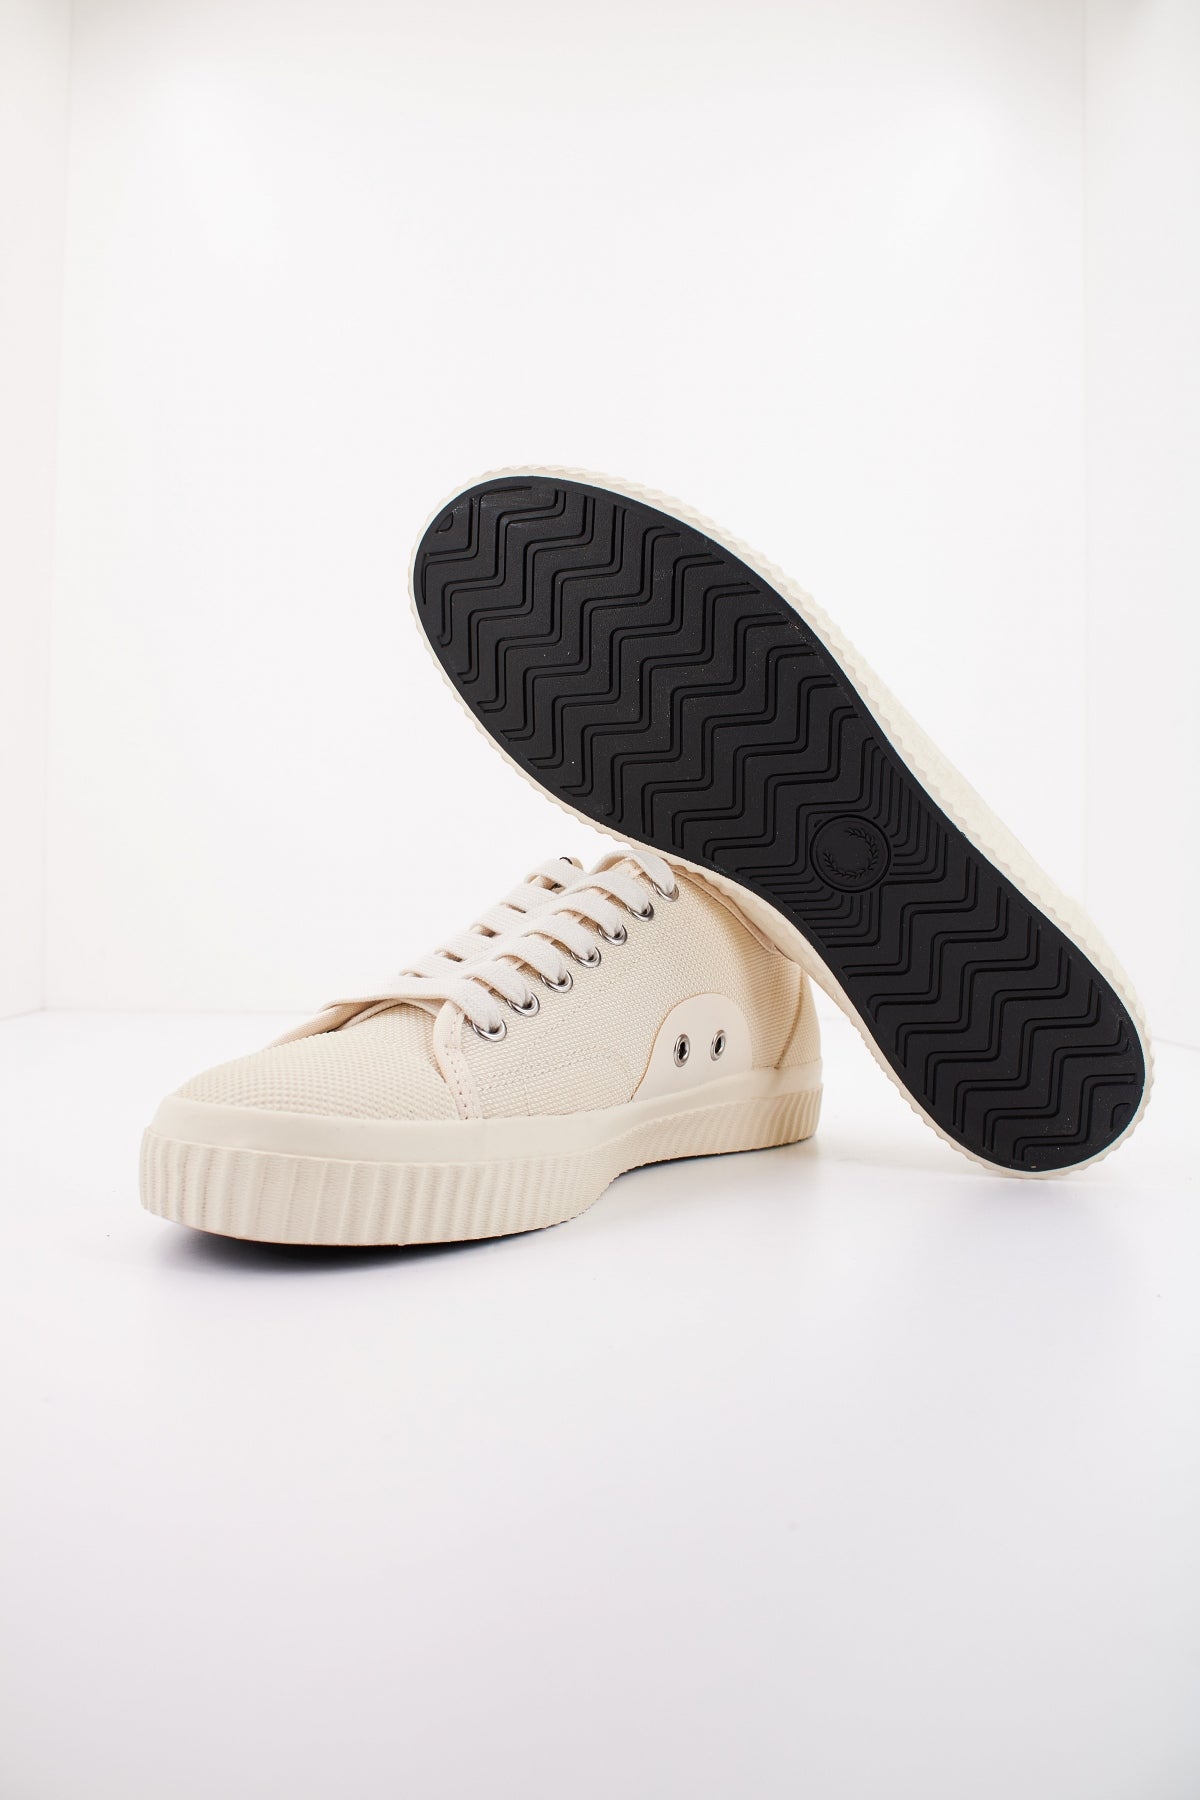 FRED PERRY  HUGHES LOW TEXTURED en color BEIS  (4)